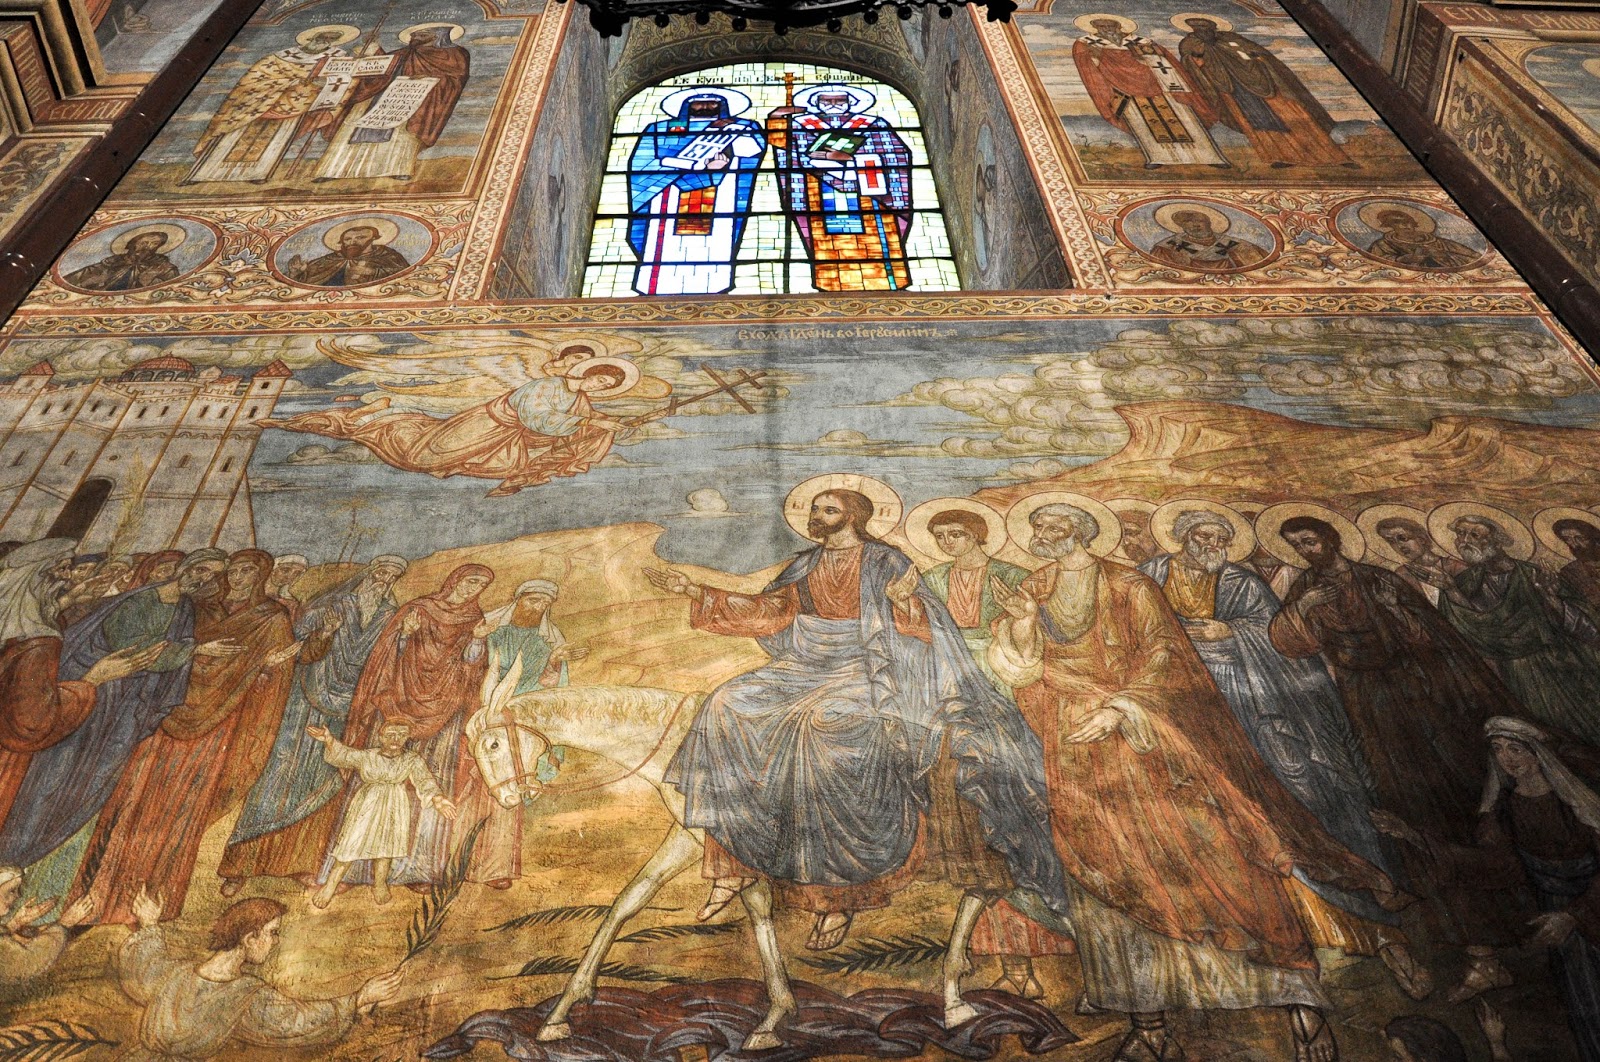 Close-up of the frescoed walls, Dormition of the Mother of God Cathedral, Varna